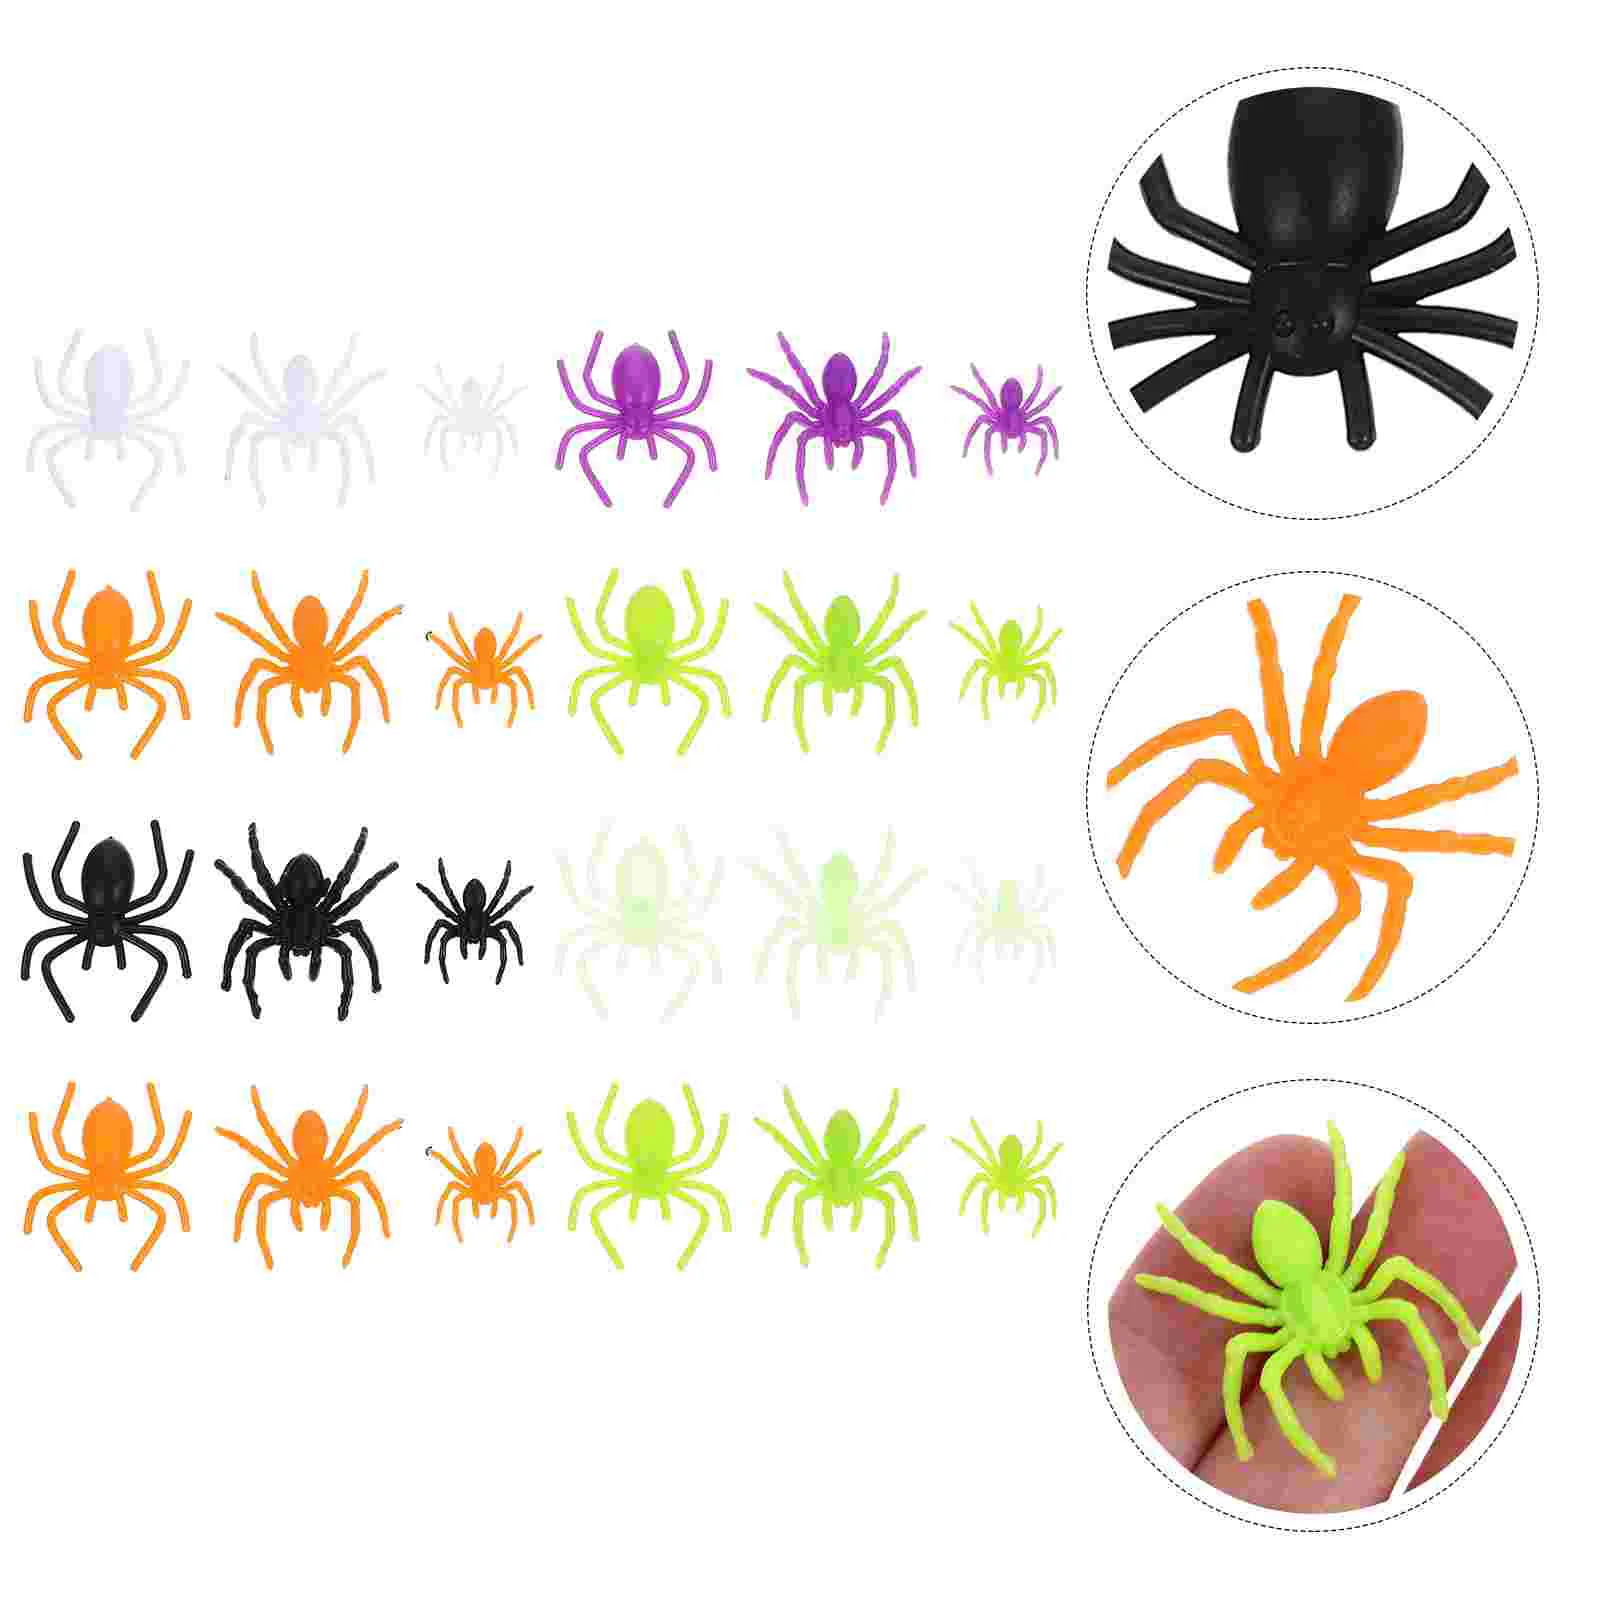 

200pcs Plastic Fake Spiders Halloween Prank Props Realistic Small Spiders Party Decorations Pranks